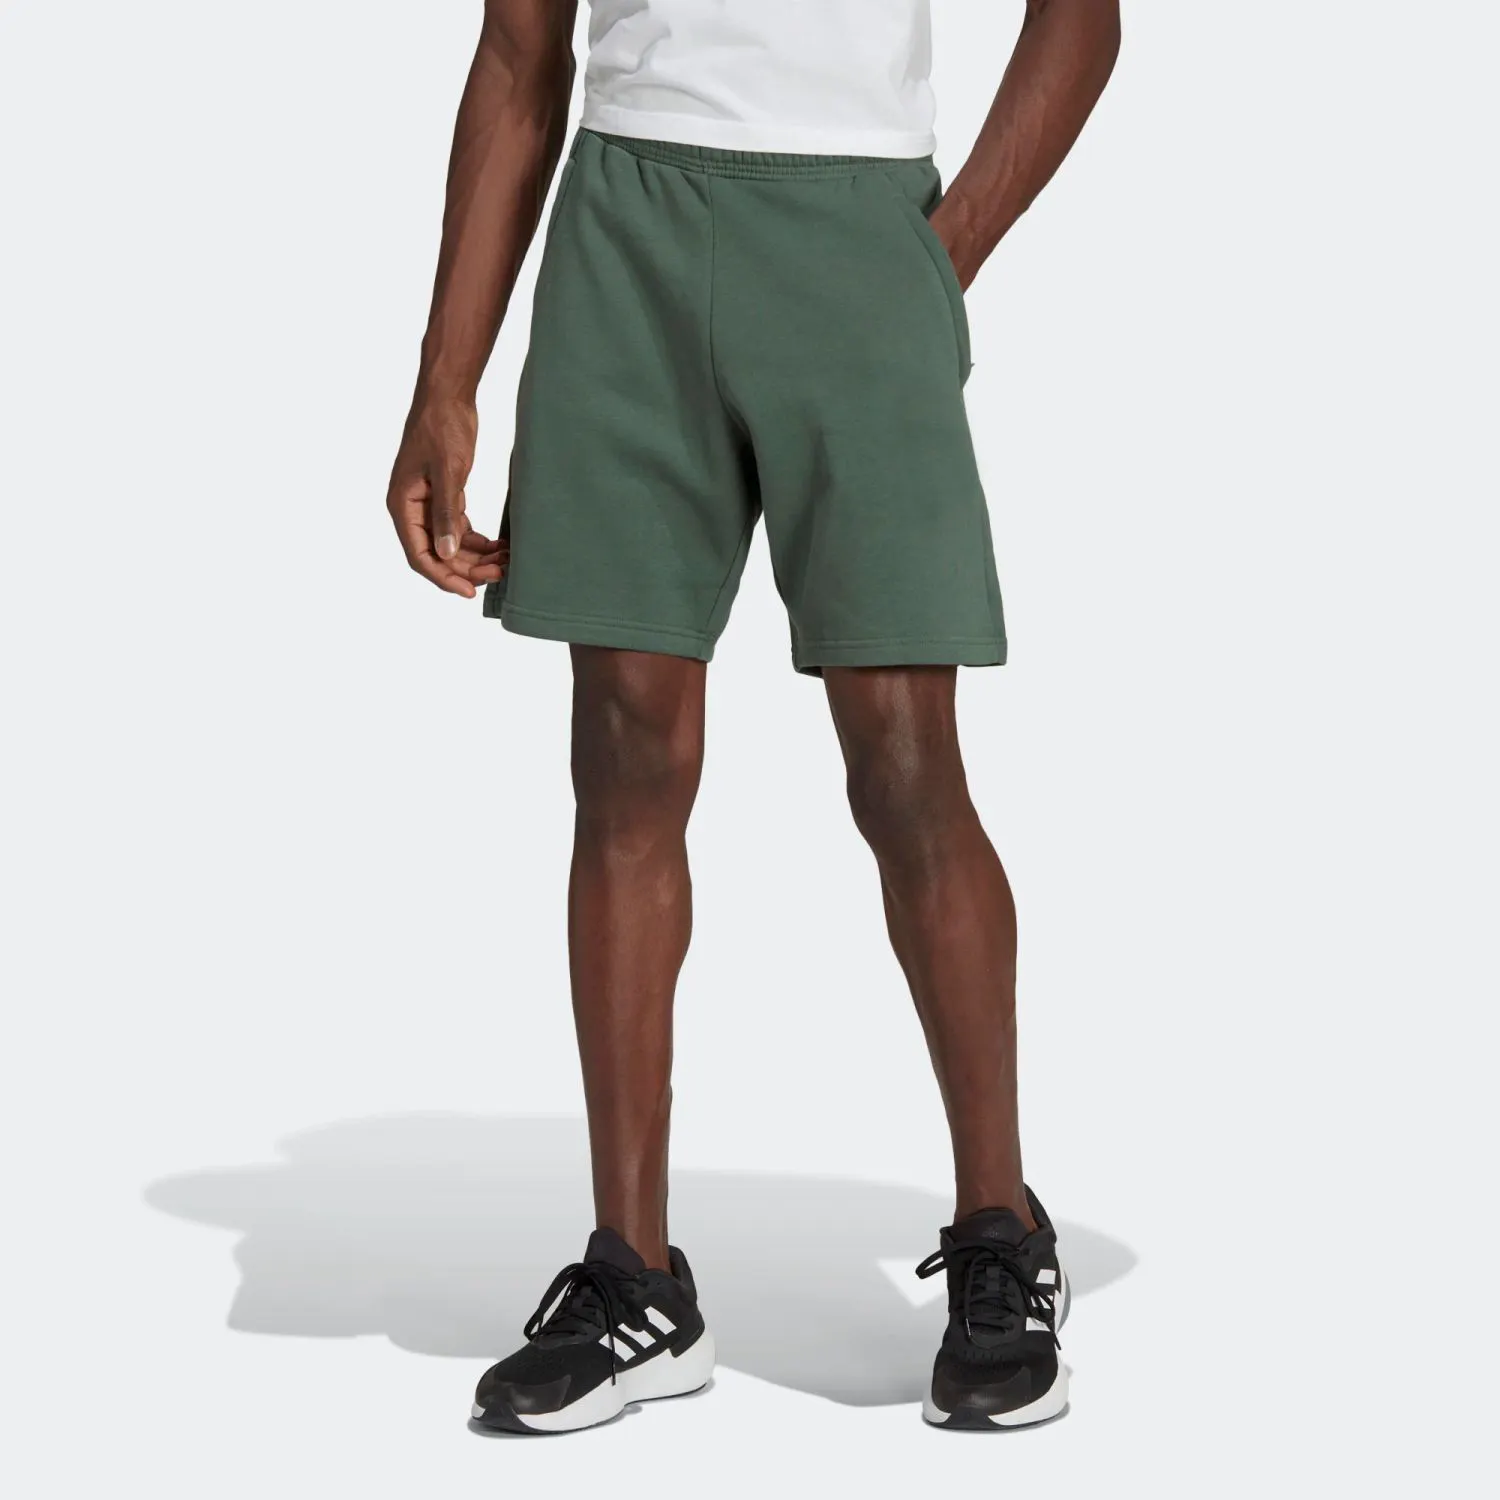 Regular Fit Drawcord on Elastic Waist 70% Cotton 30% Recycled Polyester Fleece Green Oxide Sports Shorts